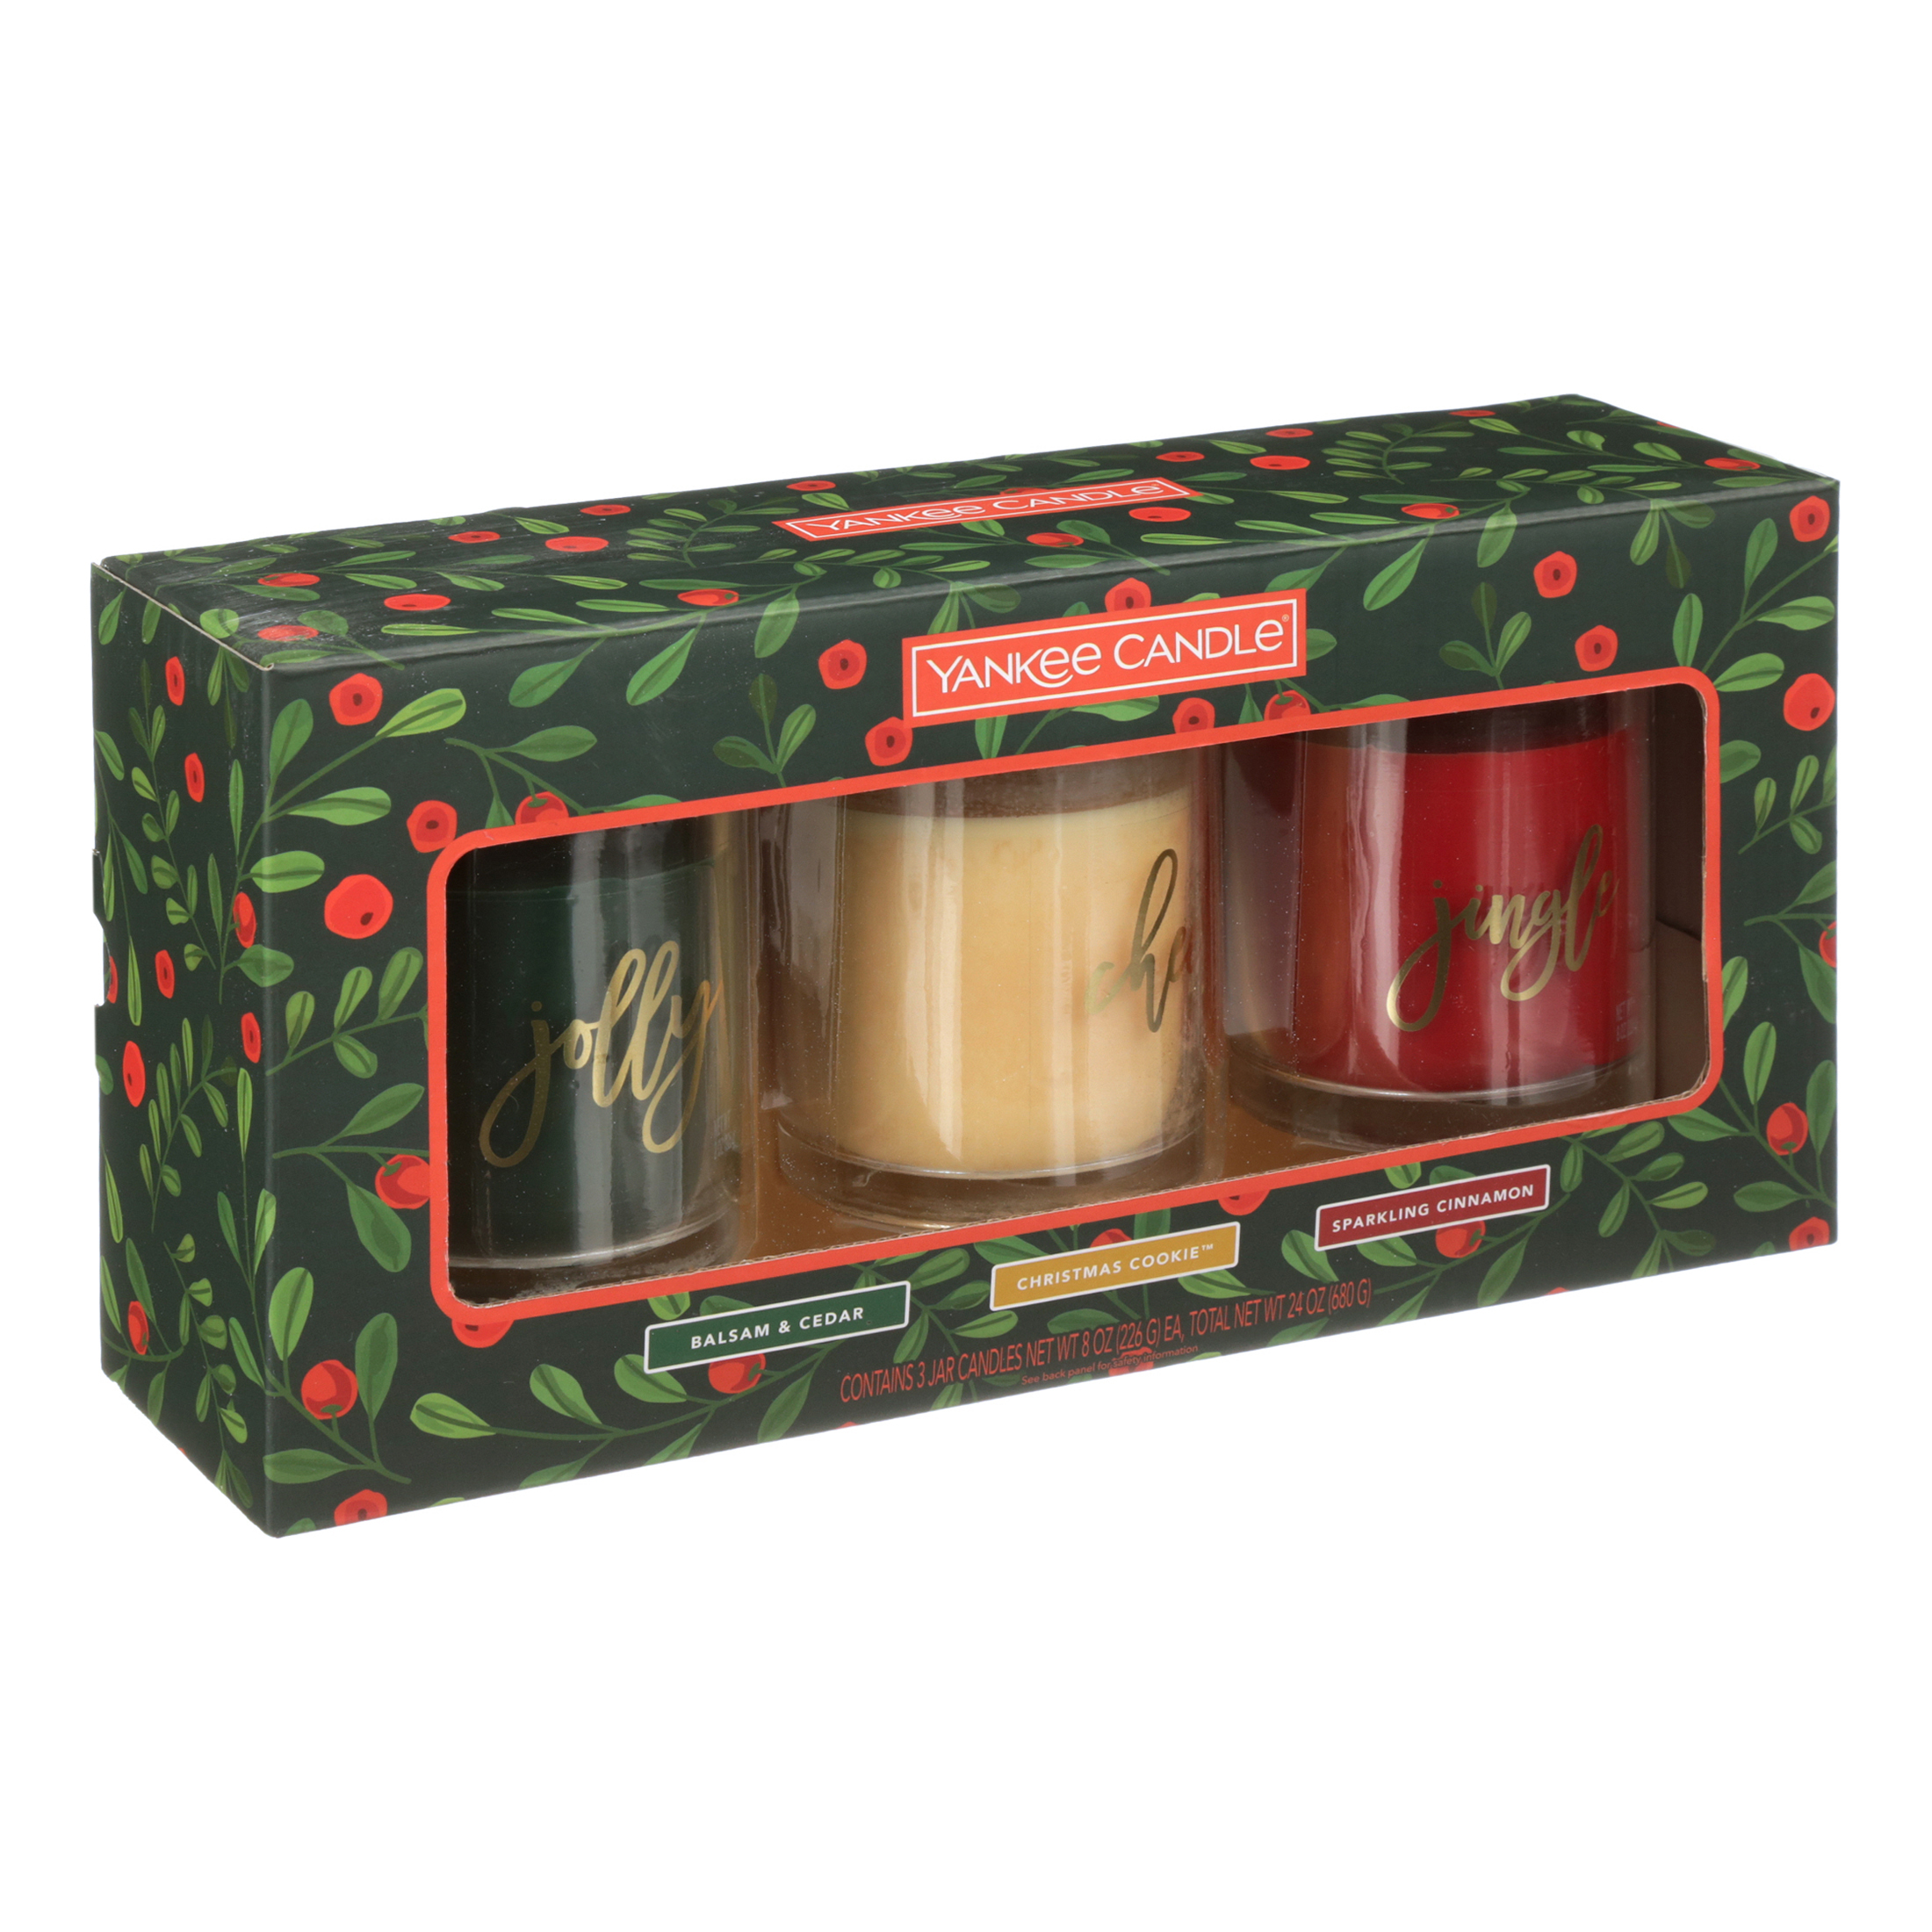 Yankee Candle 3-Pack Holiday Gift Set - image 2 of 8